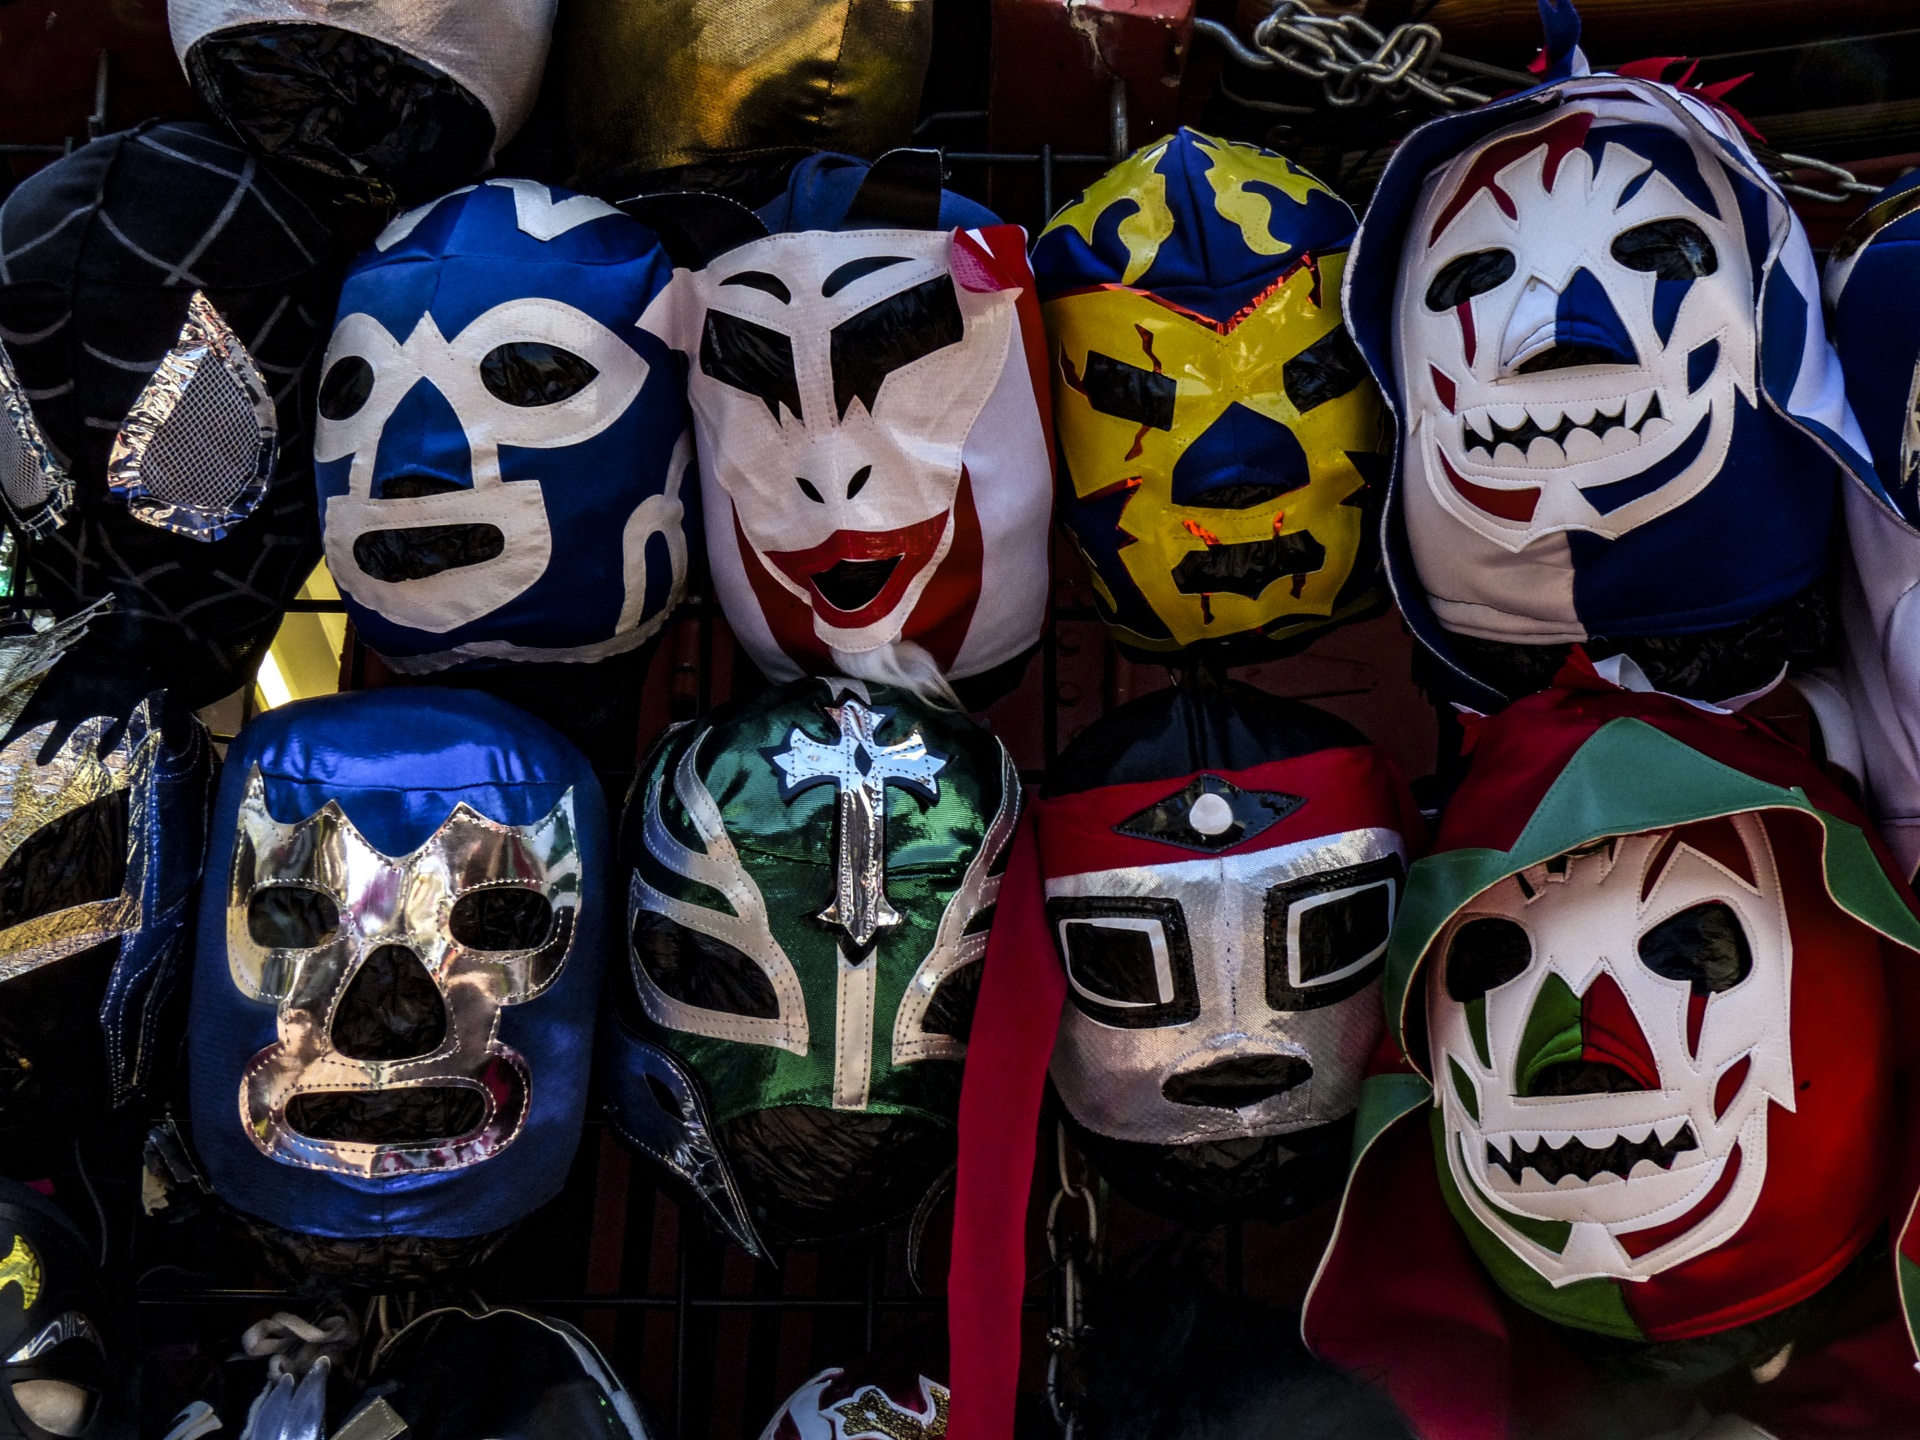 Mexican Masks in many colors